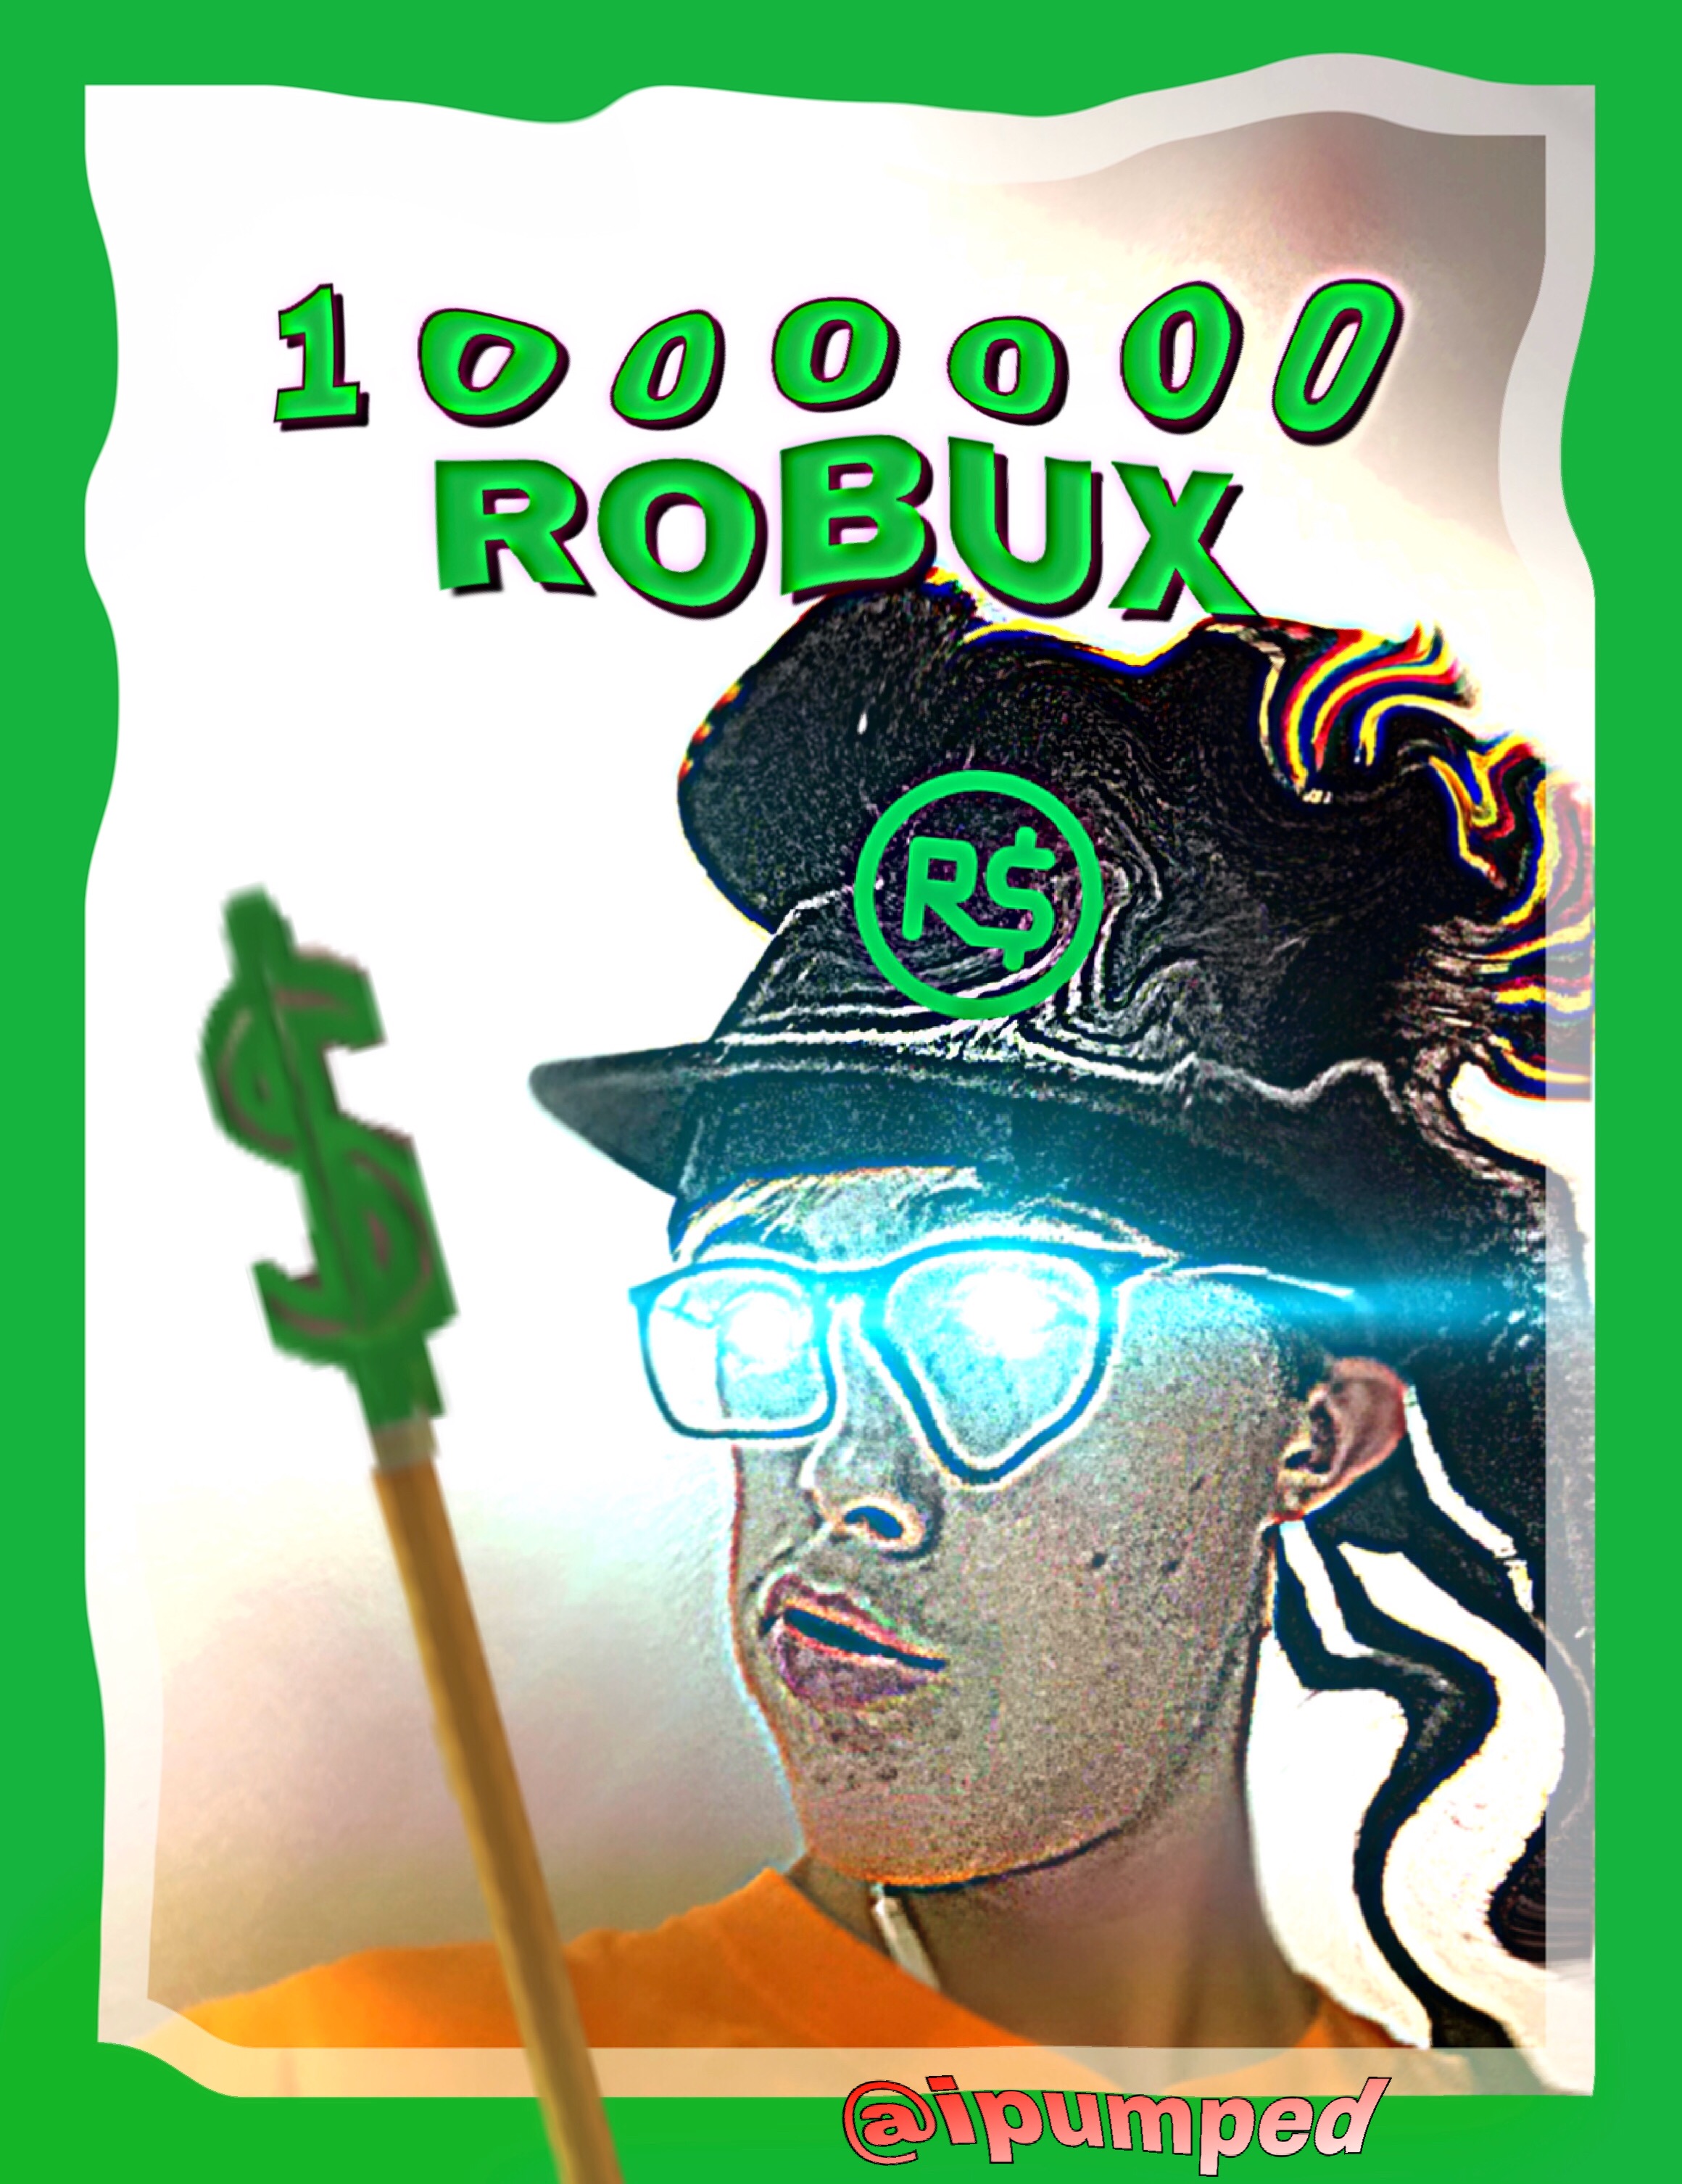 Meme Ipumped Roblox Robux Image By Ipumped - meme ipumped roblox robux